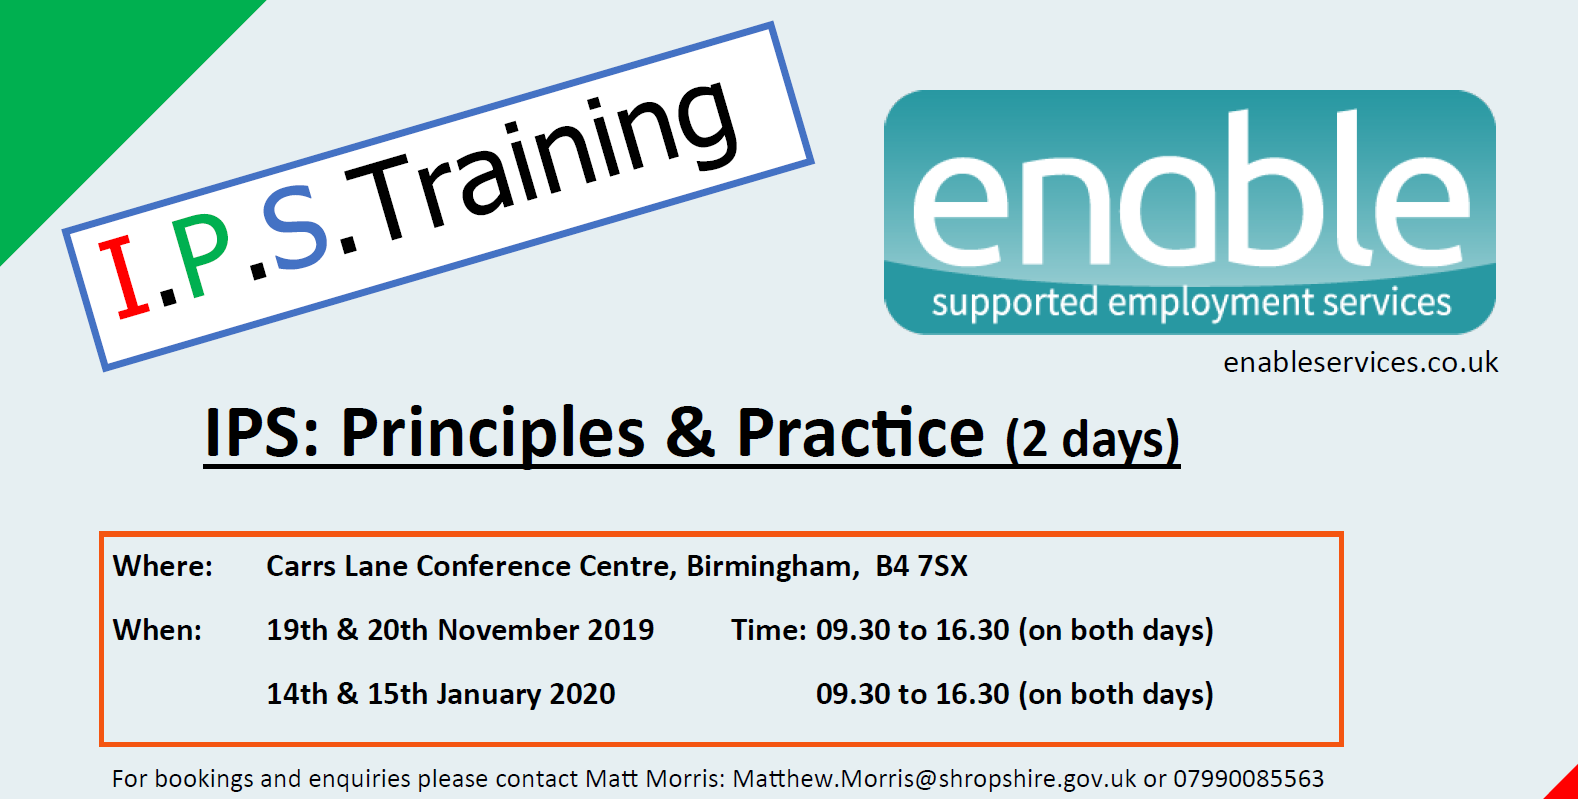 IPS Principles & Practice training Enable. Supported Employment Services